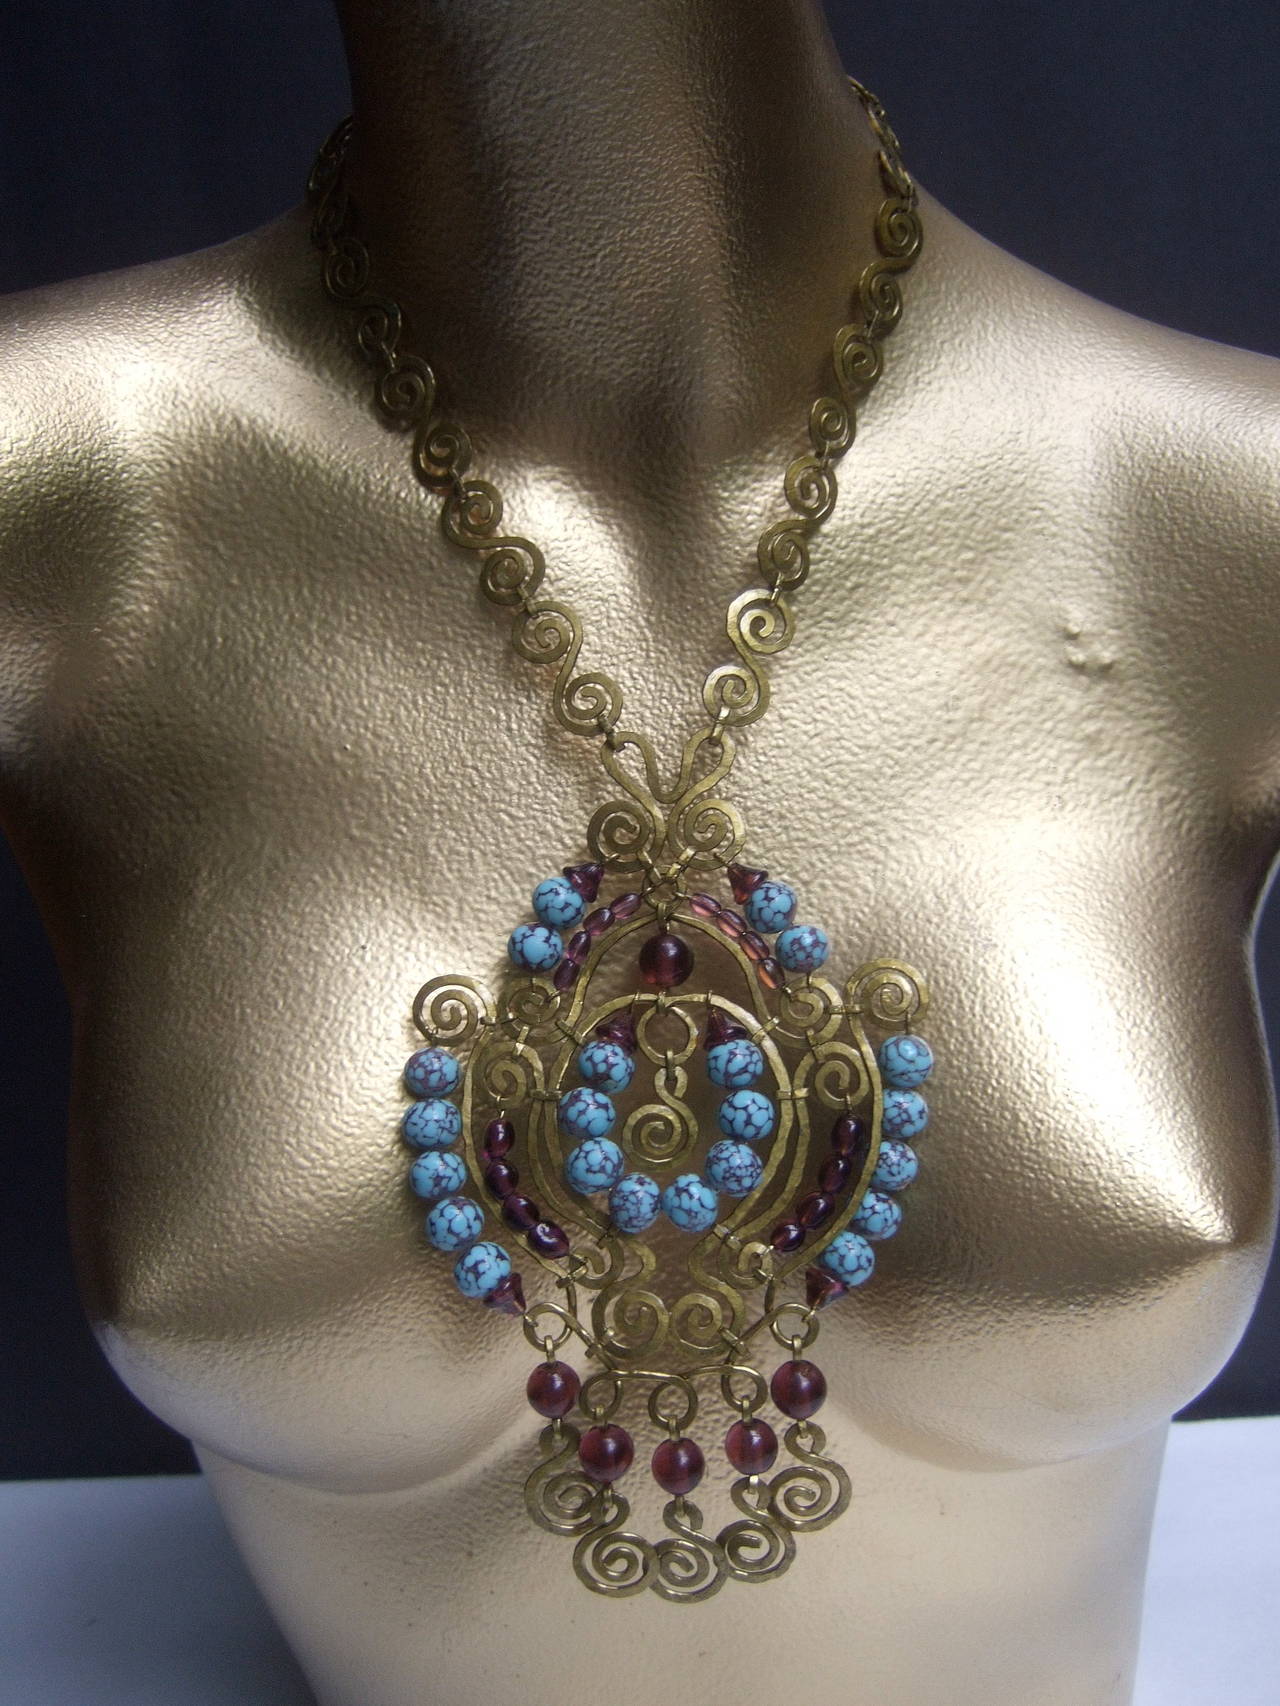 Exotic Massive Glass Beaded Etruscan Style Pendant Necklace In Excellent Condition For Sale In University City, MO